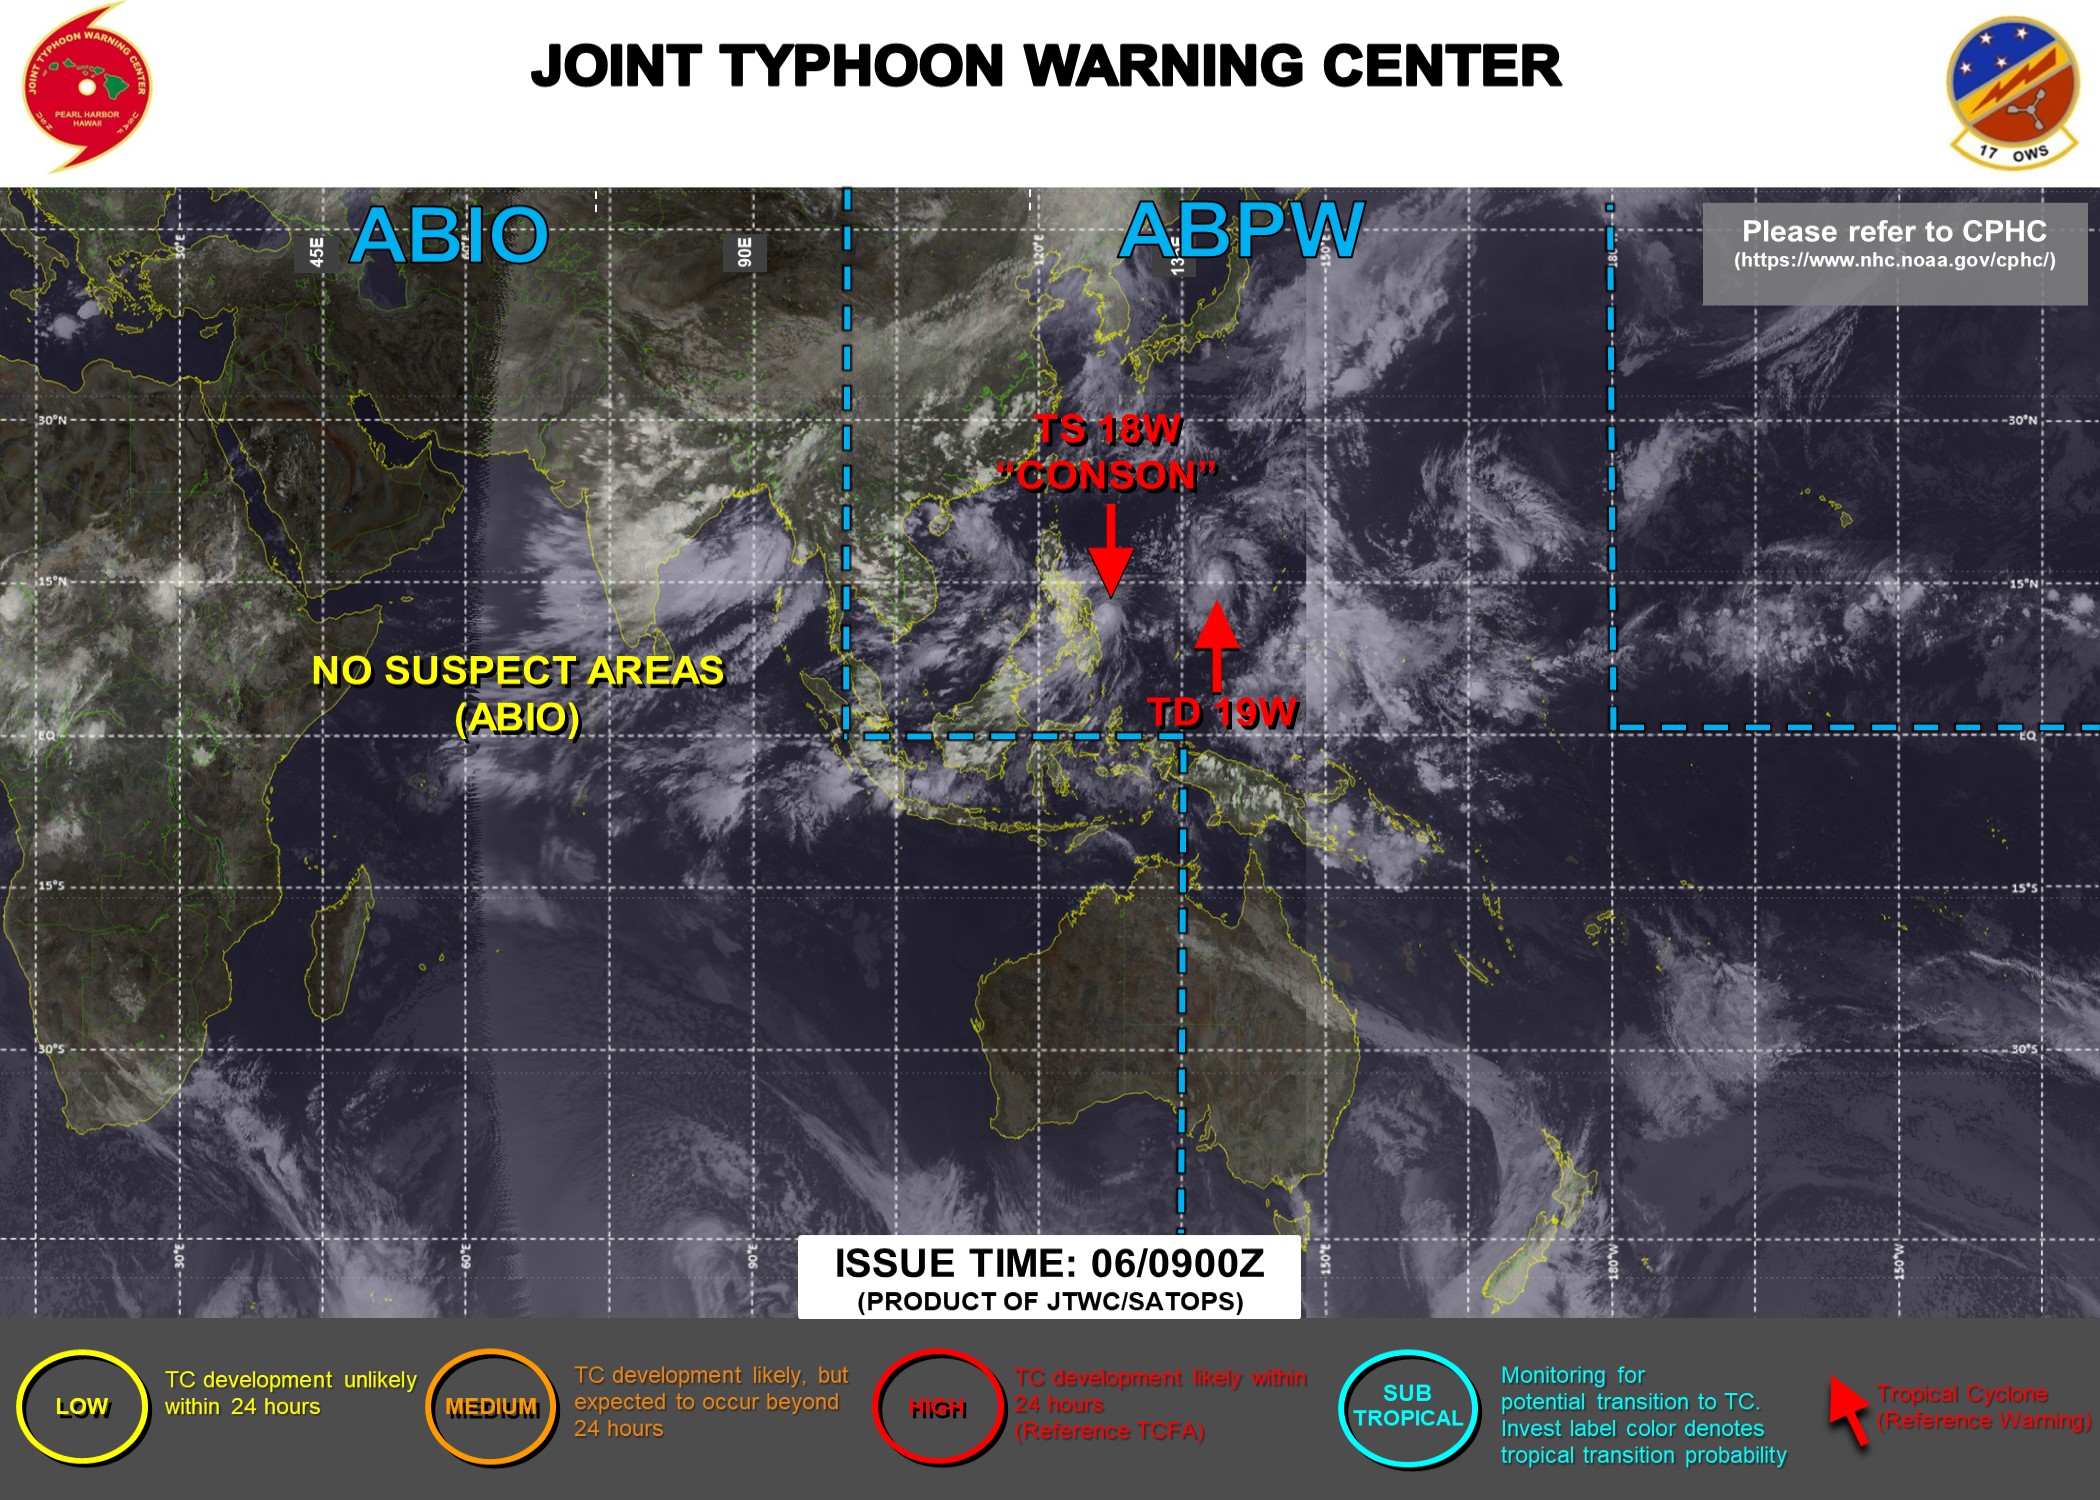 JTWC ARE NOW ISSUING 6HOURLY WARNINGS AND 3HOURLY SATELLITE BULLETINS ON 18W AND 19W.